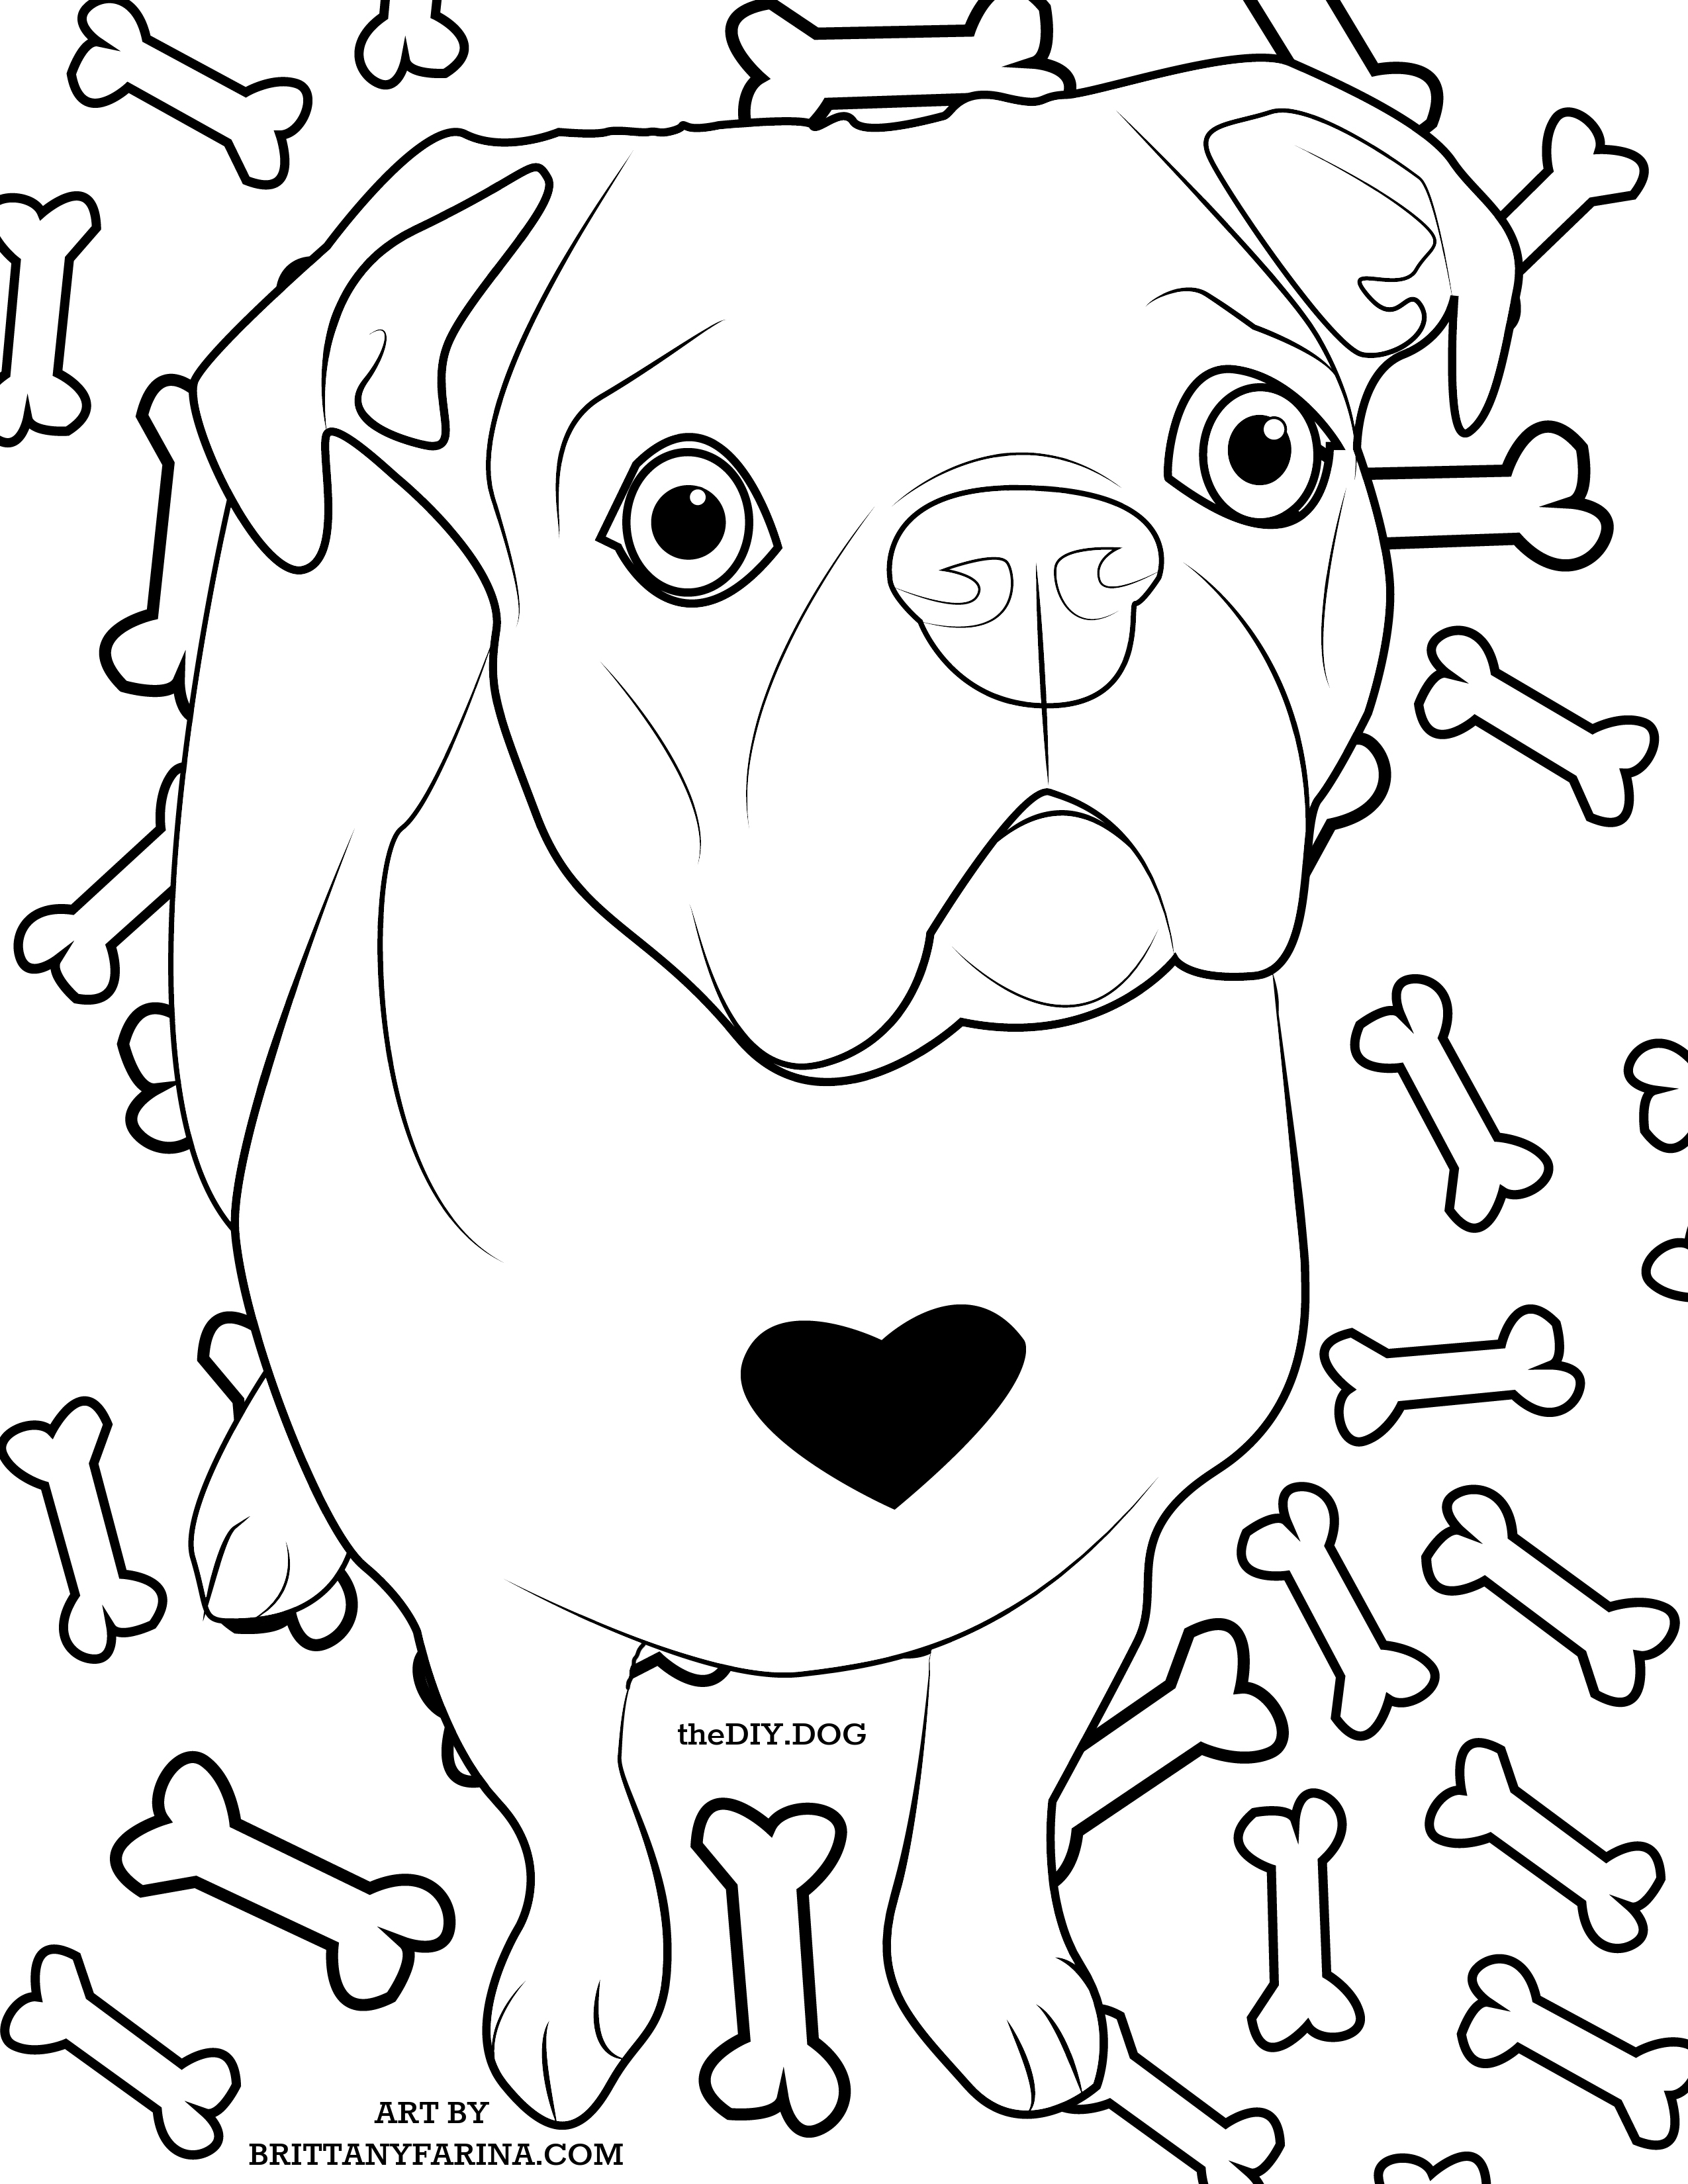 How To Turn Your Dog Into a Coloring Page - Kol's Notes